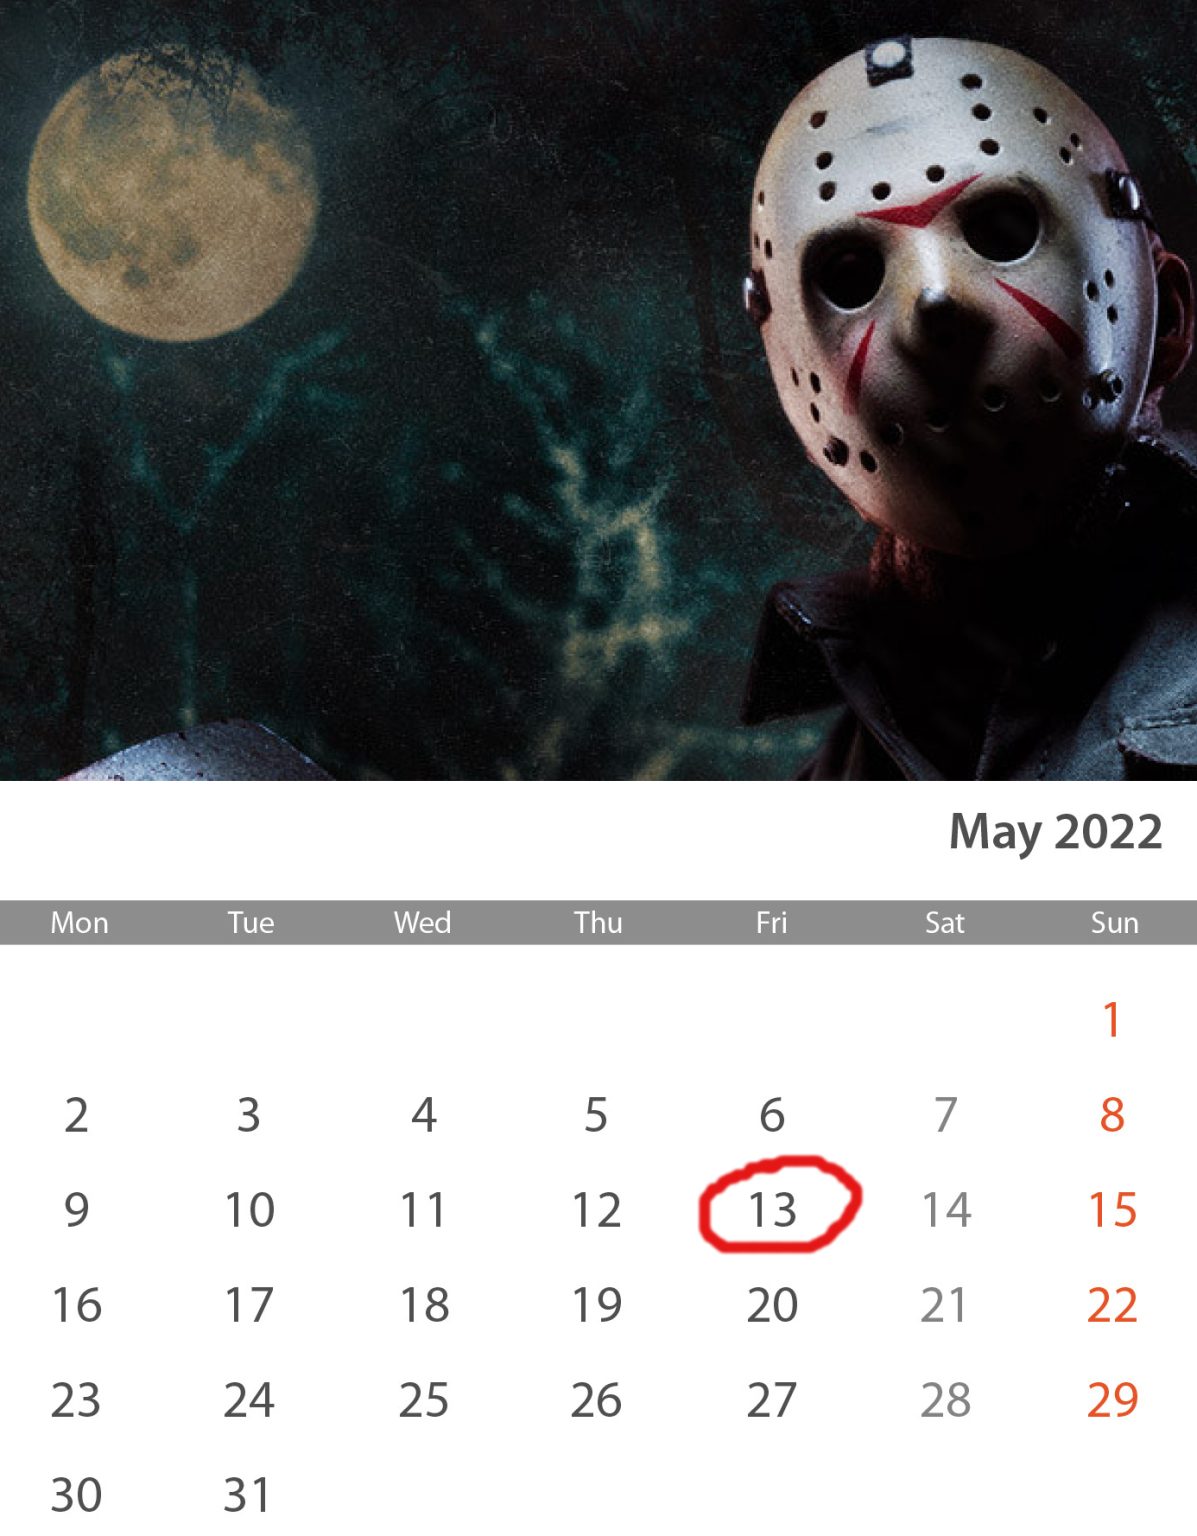 Every Friday The 13th From 1813 to 2113